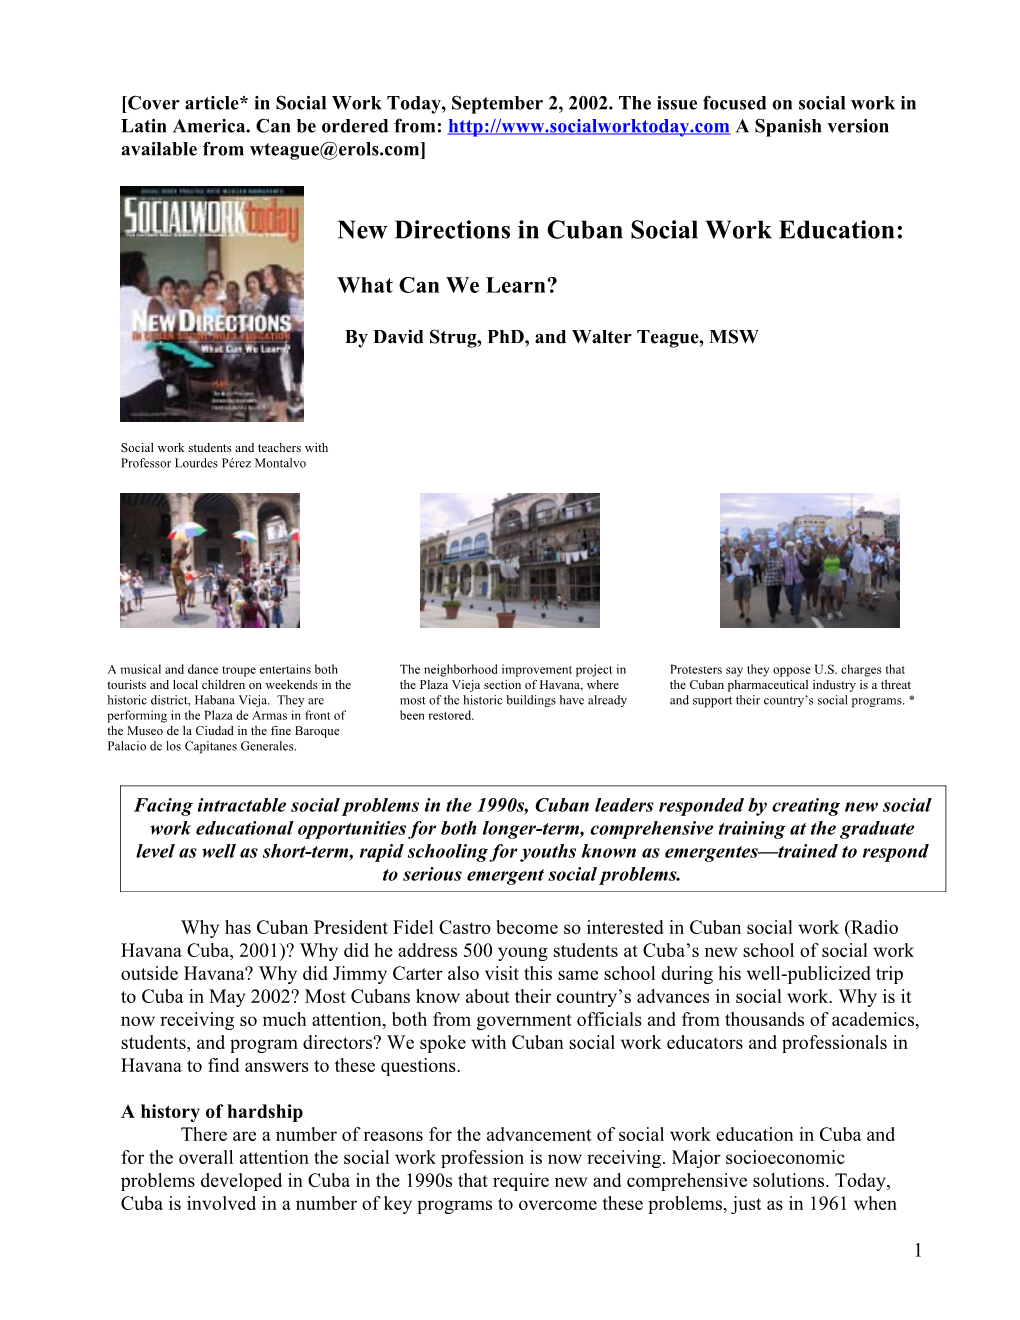 New Directions in Cuban Social Work Education